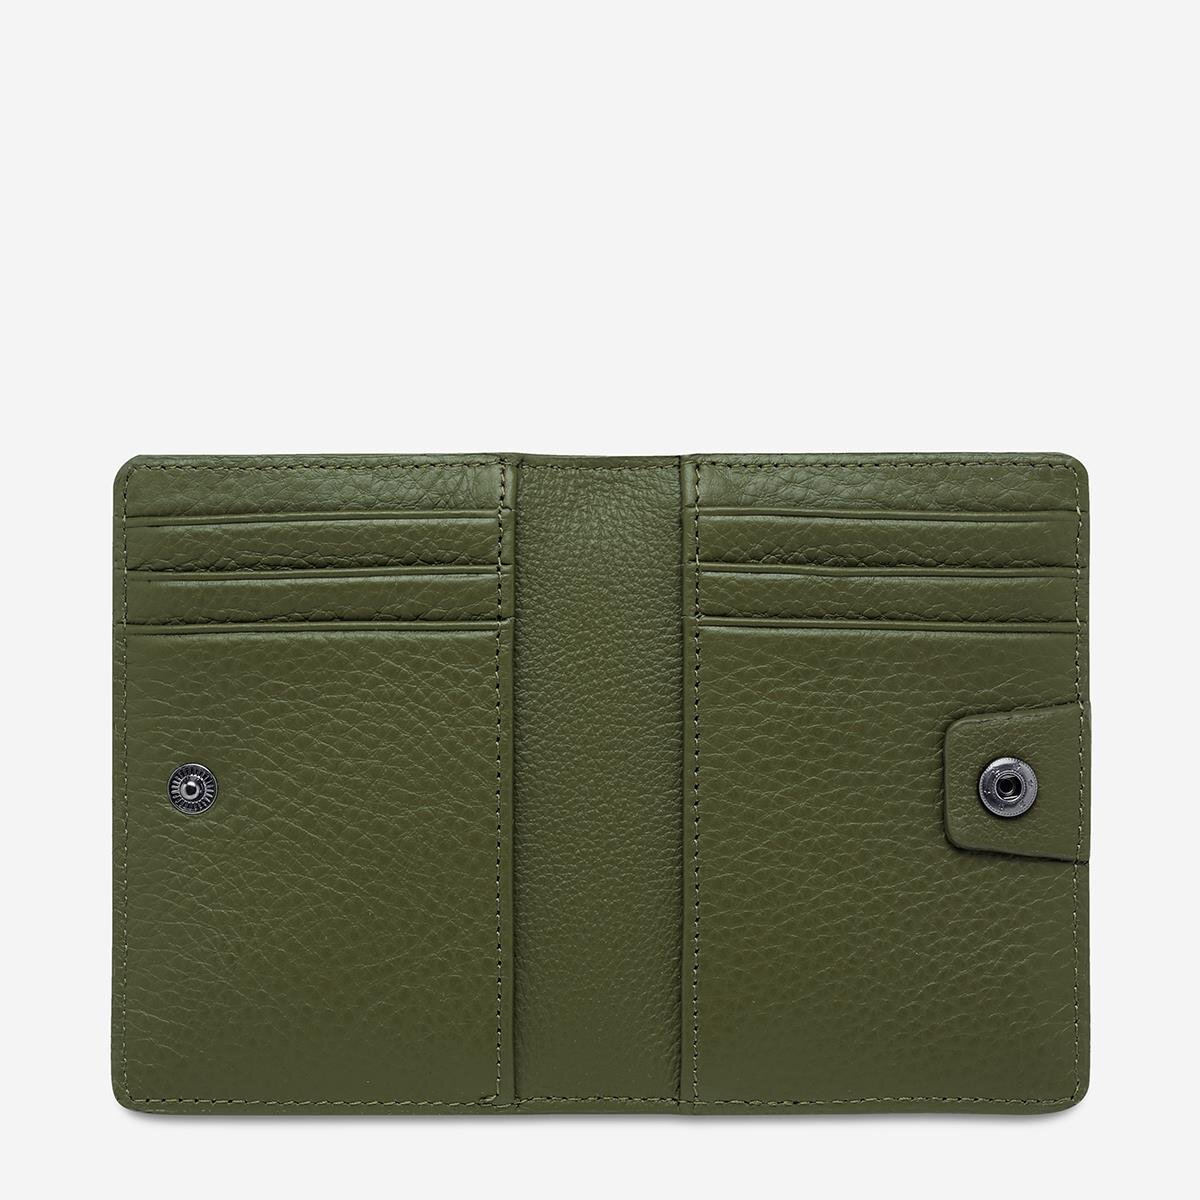 Easy Does It Wallet (Khaki) - Accessories-Bags / Wallets : Just